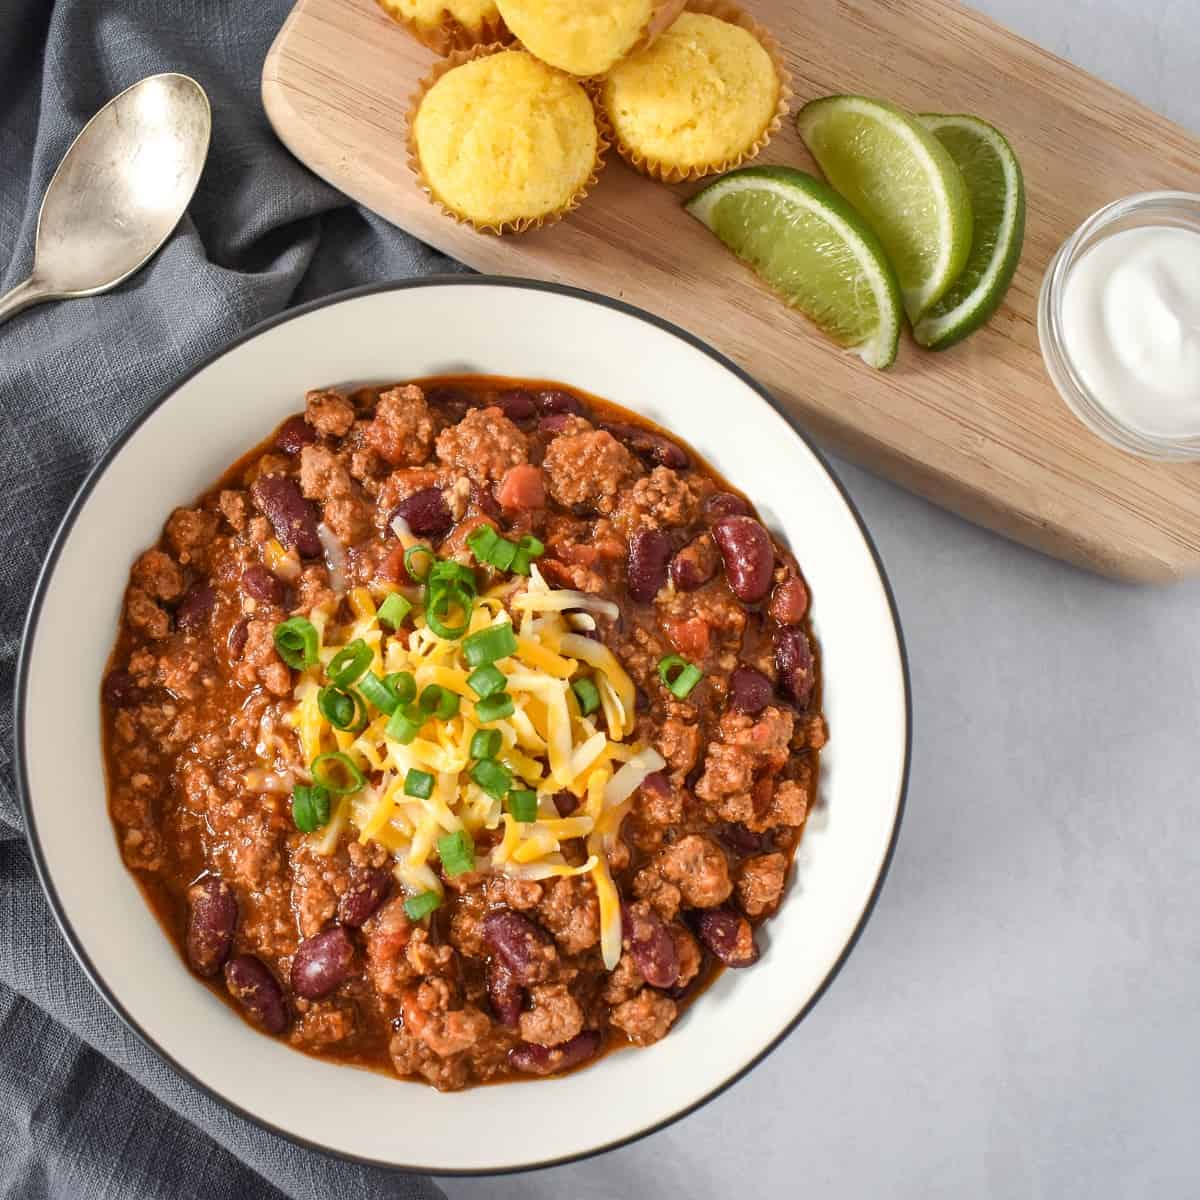 An image of the chili garnished with cheese and green onions and served with cornbread muffins, lime wedges, and sour cream on the side.